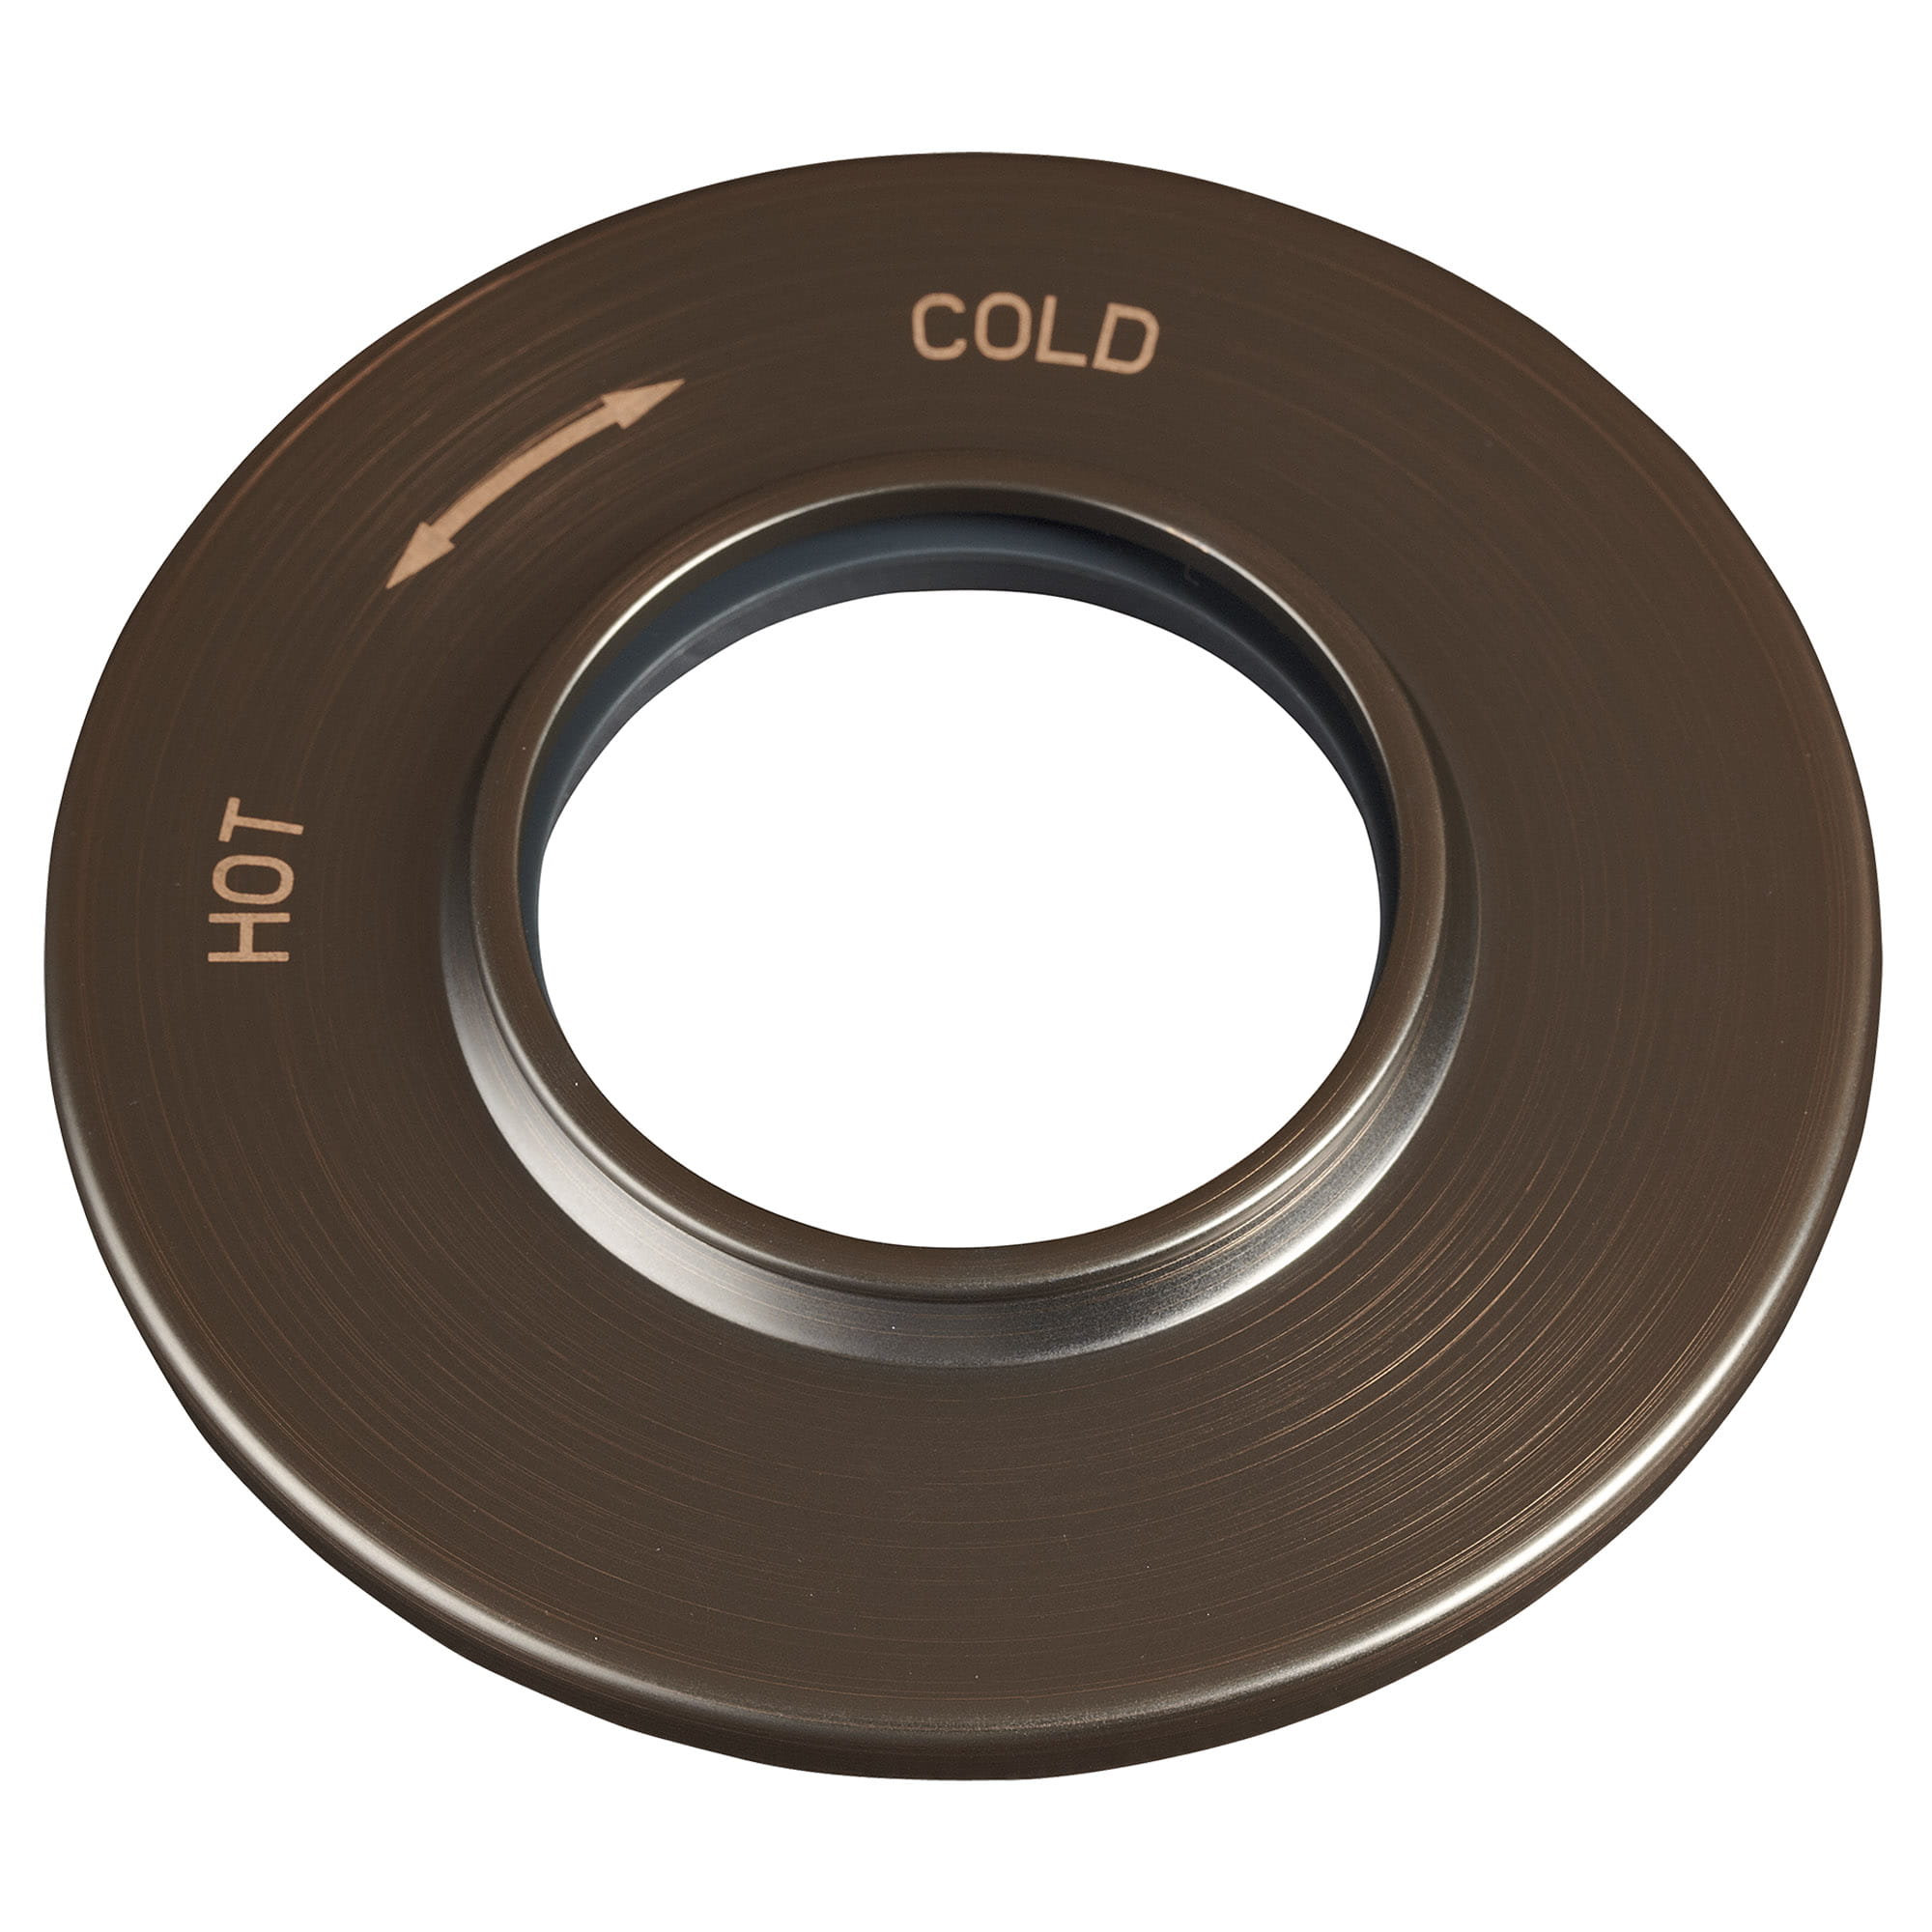 H961235-Ashbee/Col/Vict Cover Ring Thermo